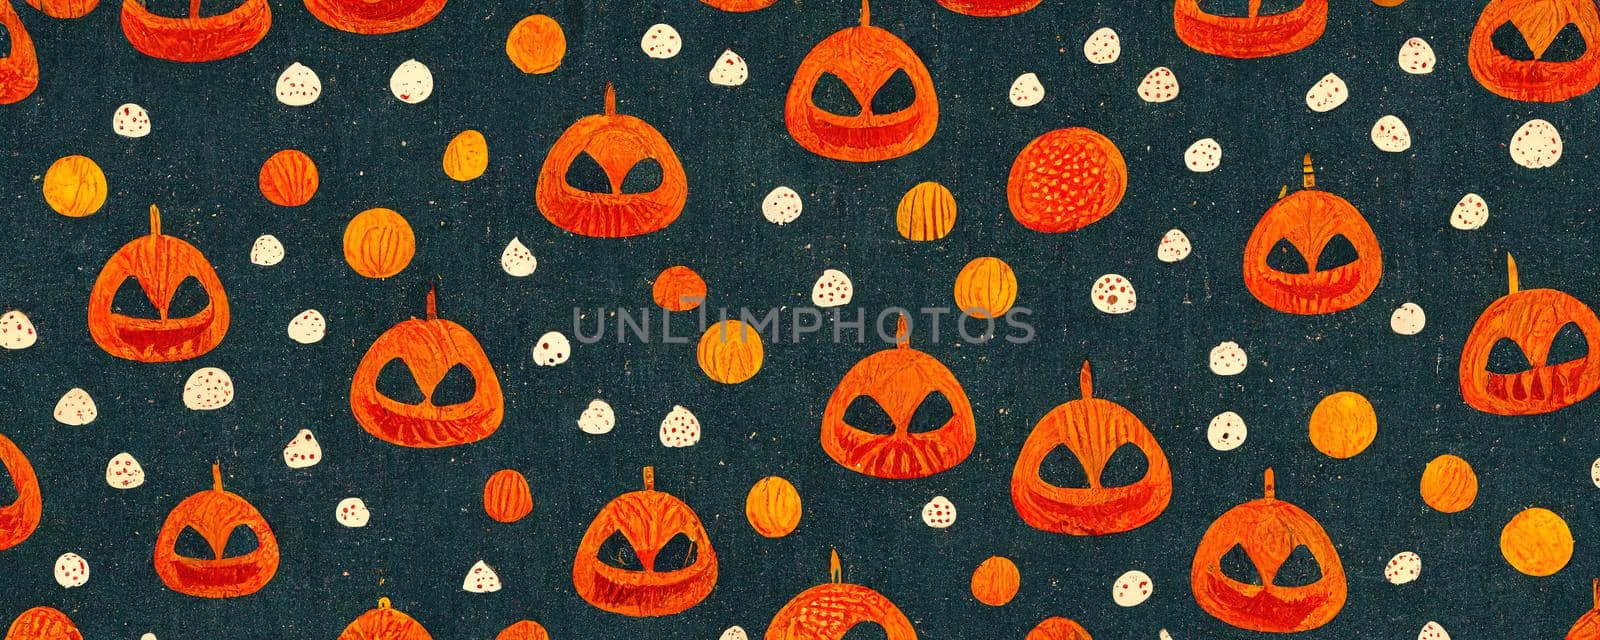 stylish abstract fabric pattern with halloween pumpkins by TRMK